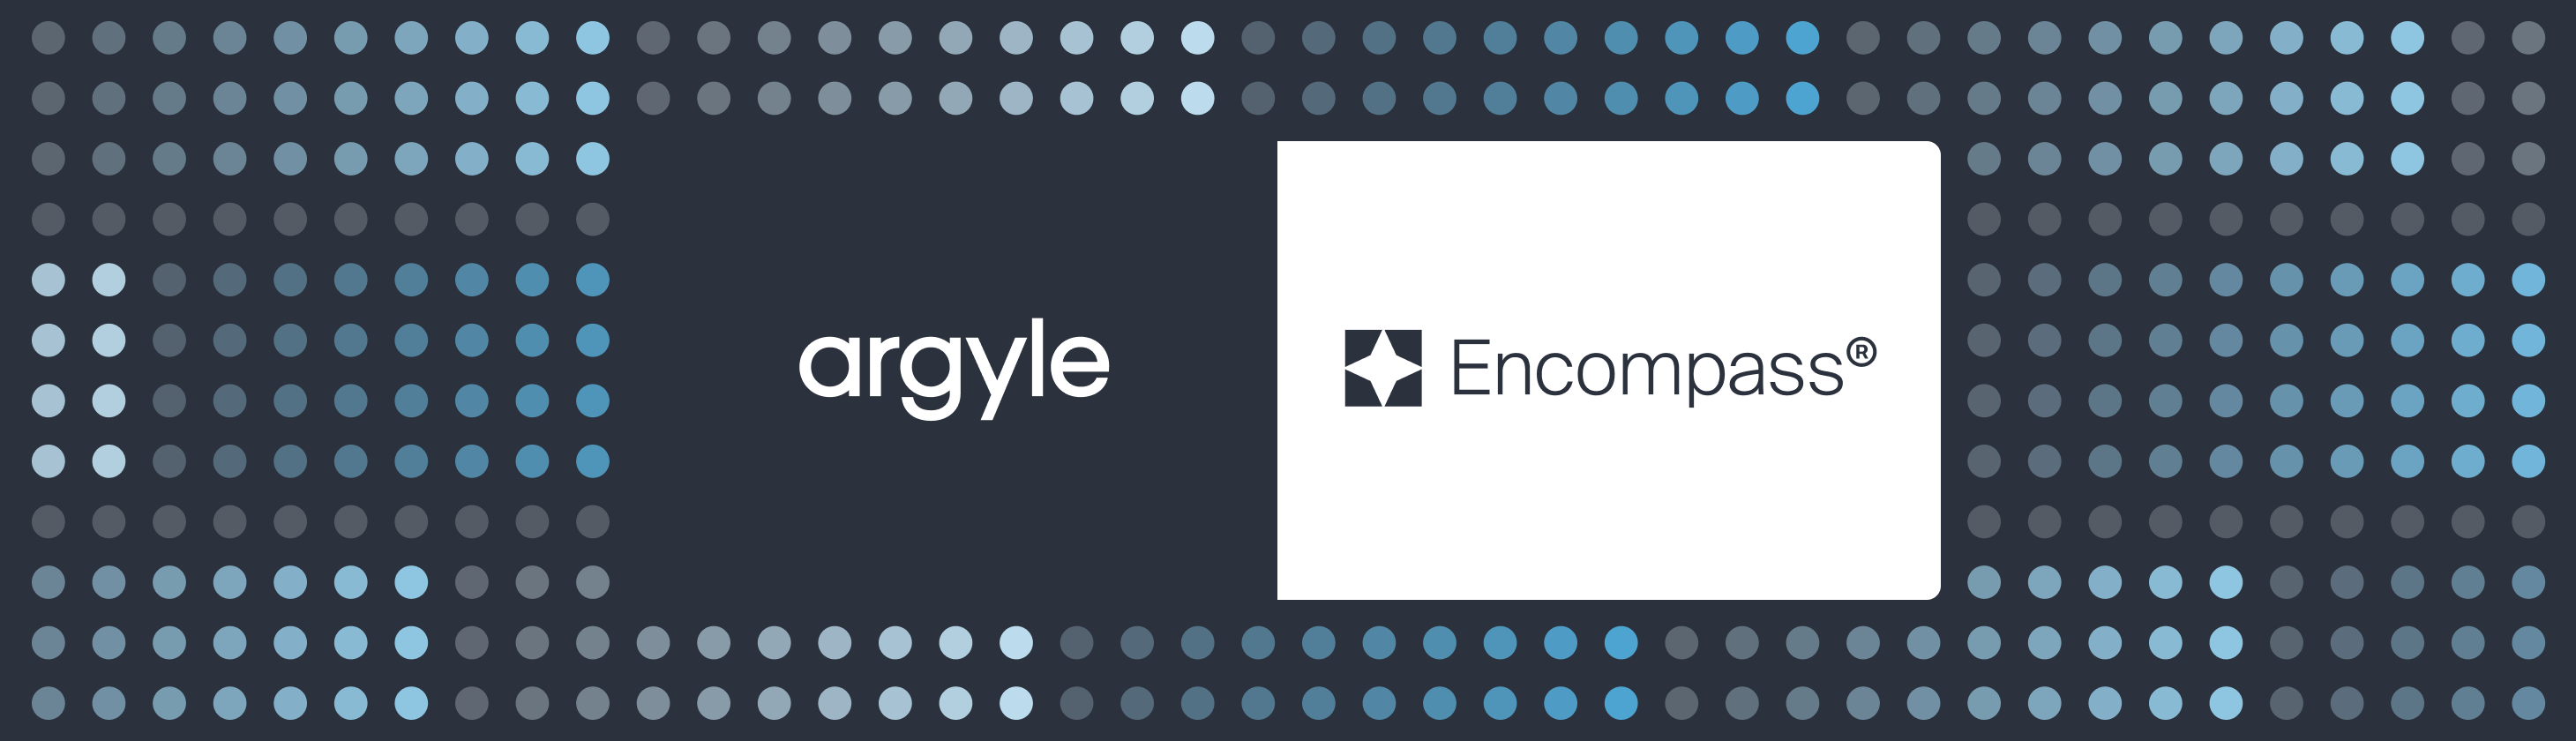 Encompass® Makes Argyle Available for Automated Ordering